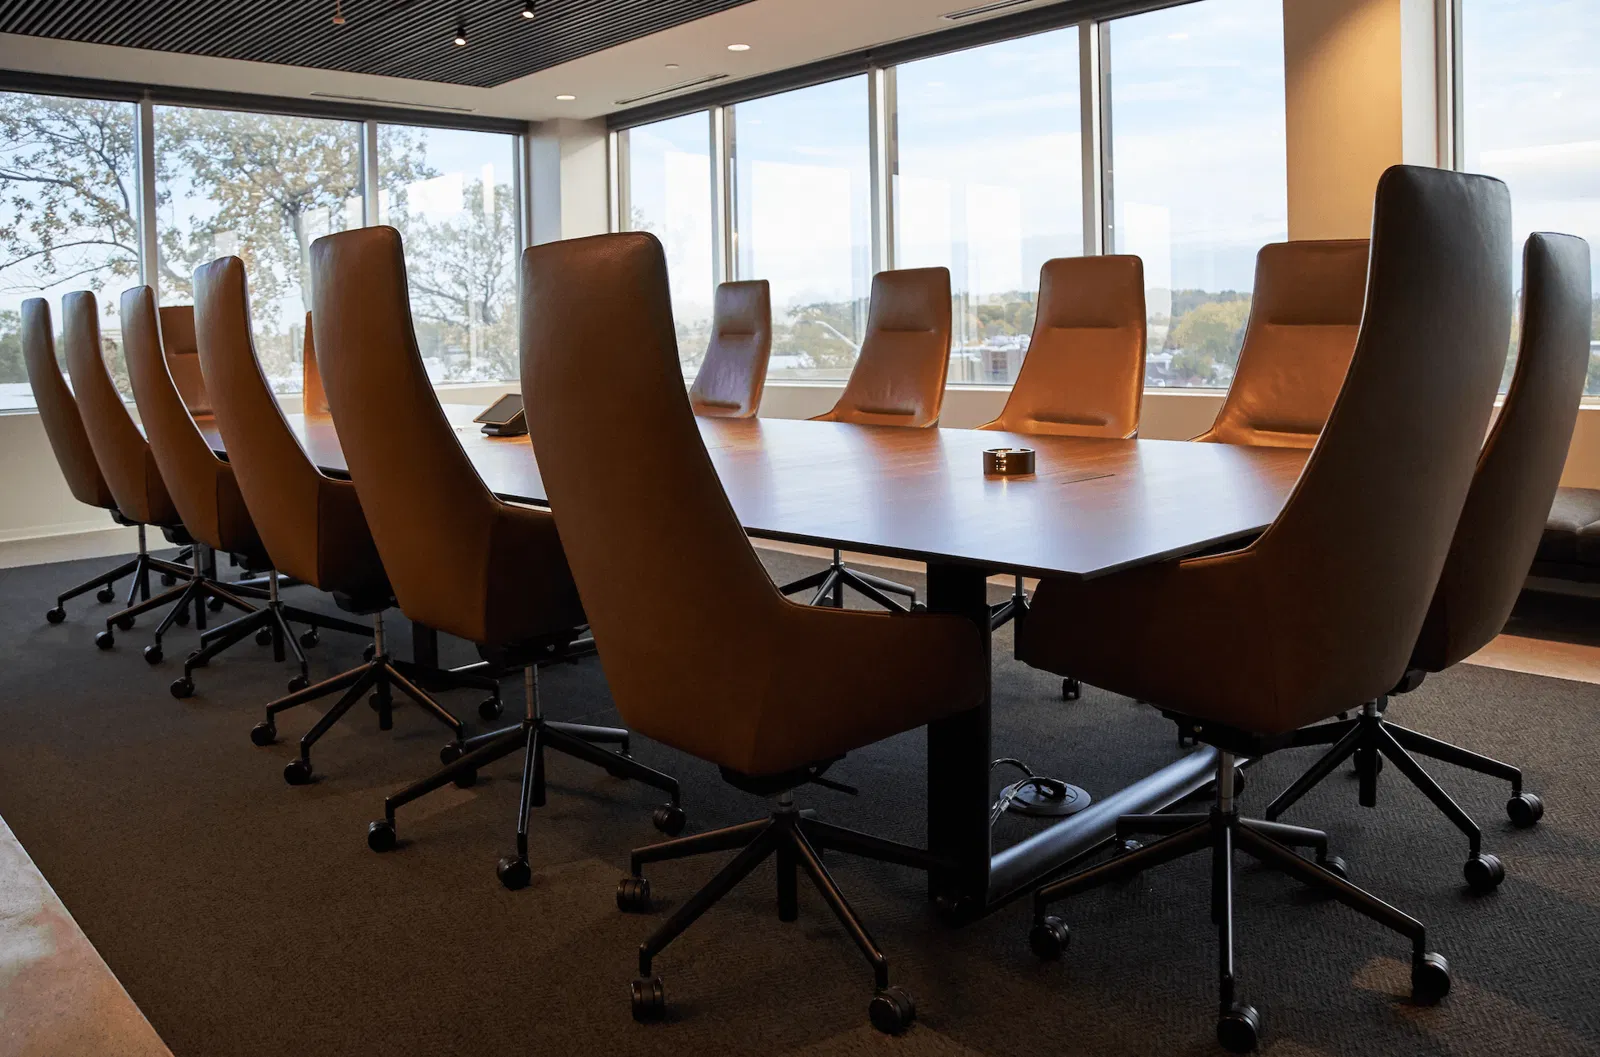 Meeting room: long office table with a lot of chairs. All room covered with windows